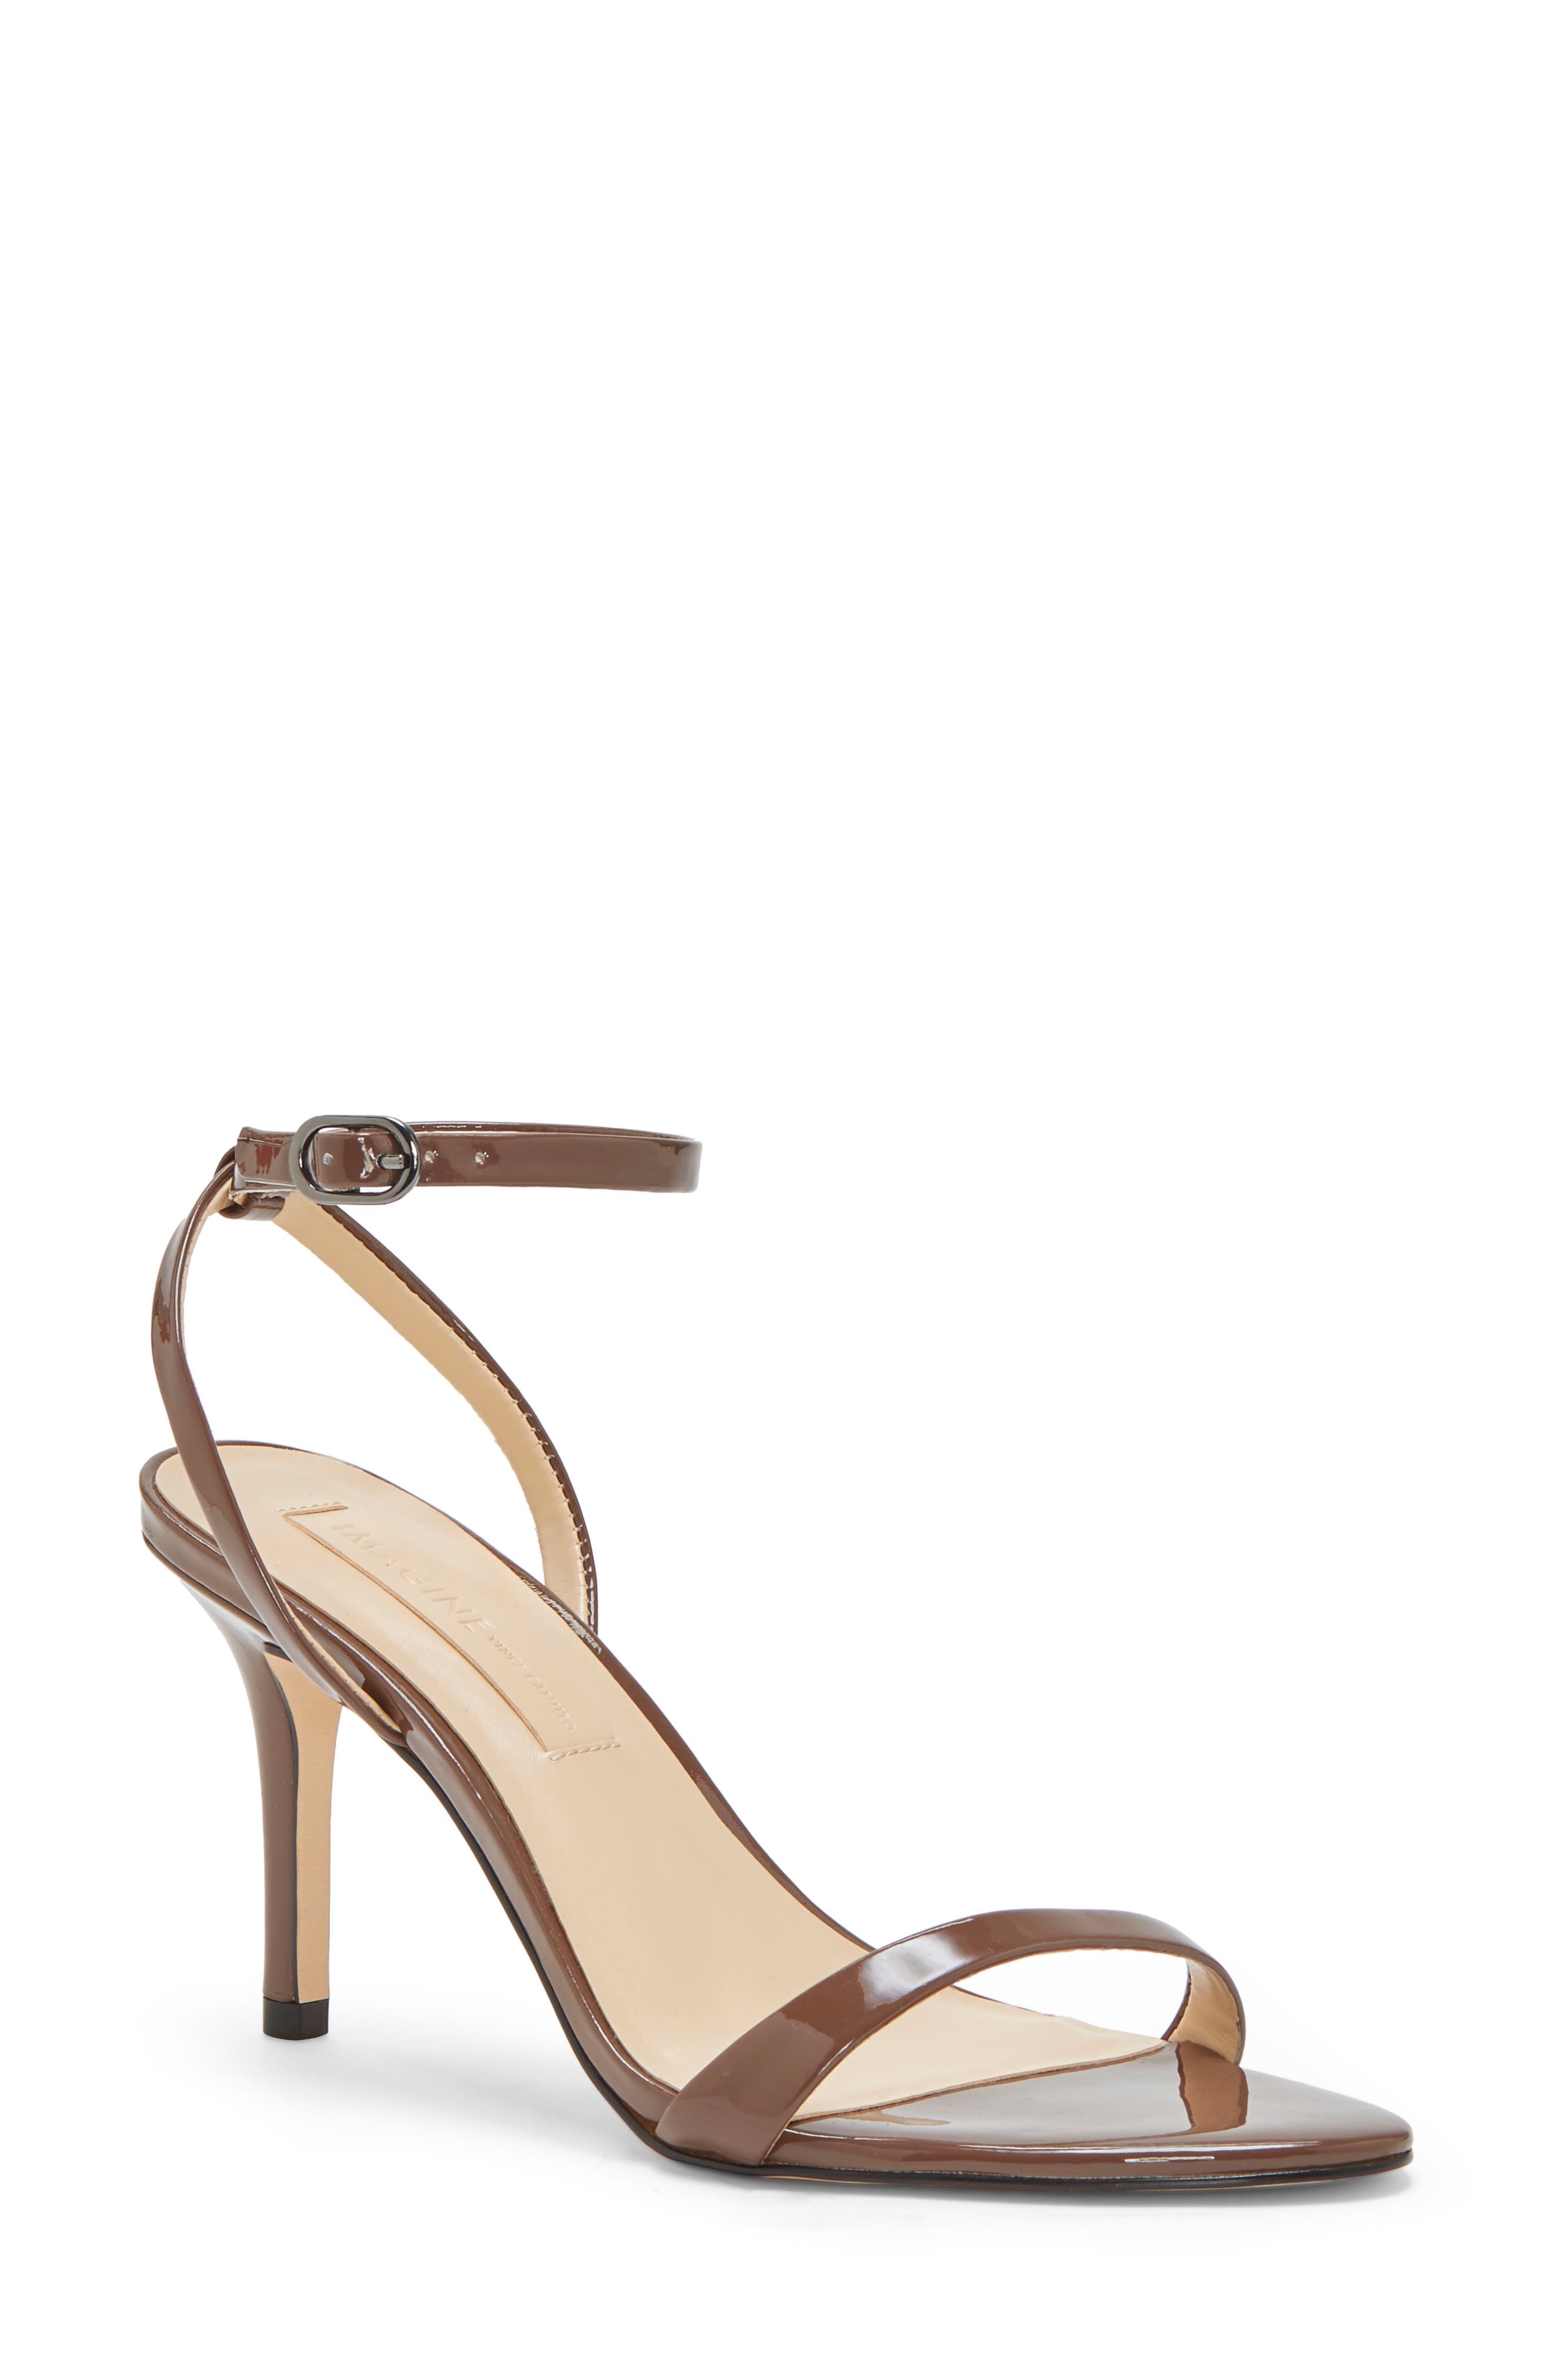 nordstrom vince camuto shoes